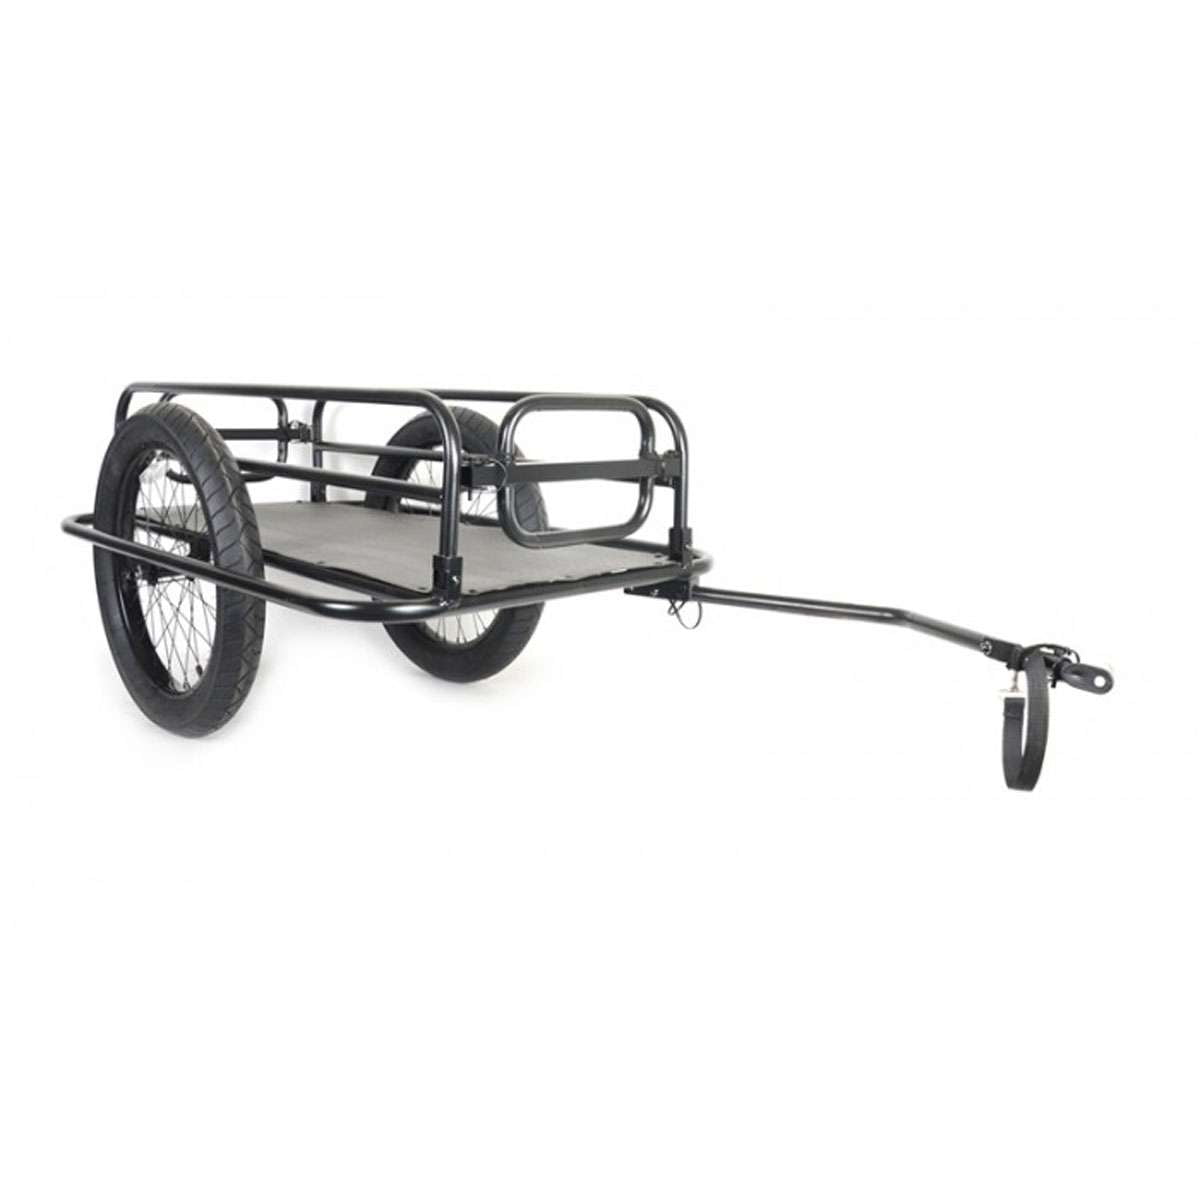 Cycle Force Trail-Monster Bicycle Cargo Trailer - 1060001 